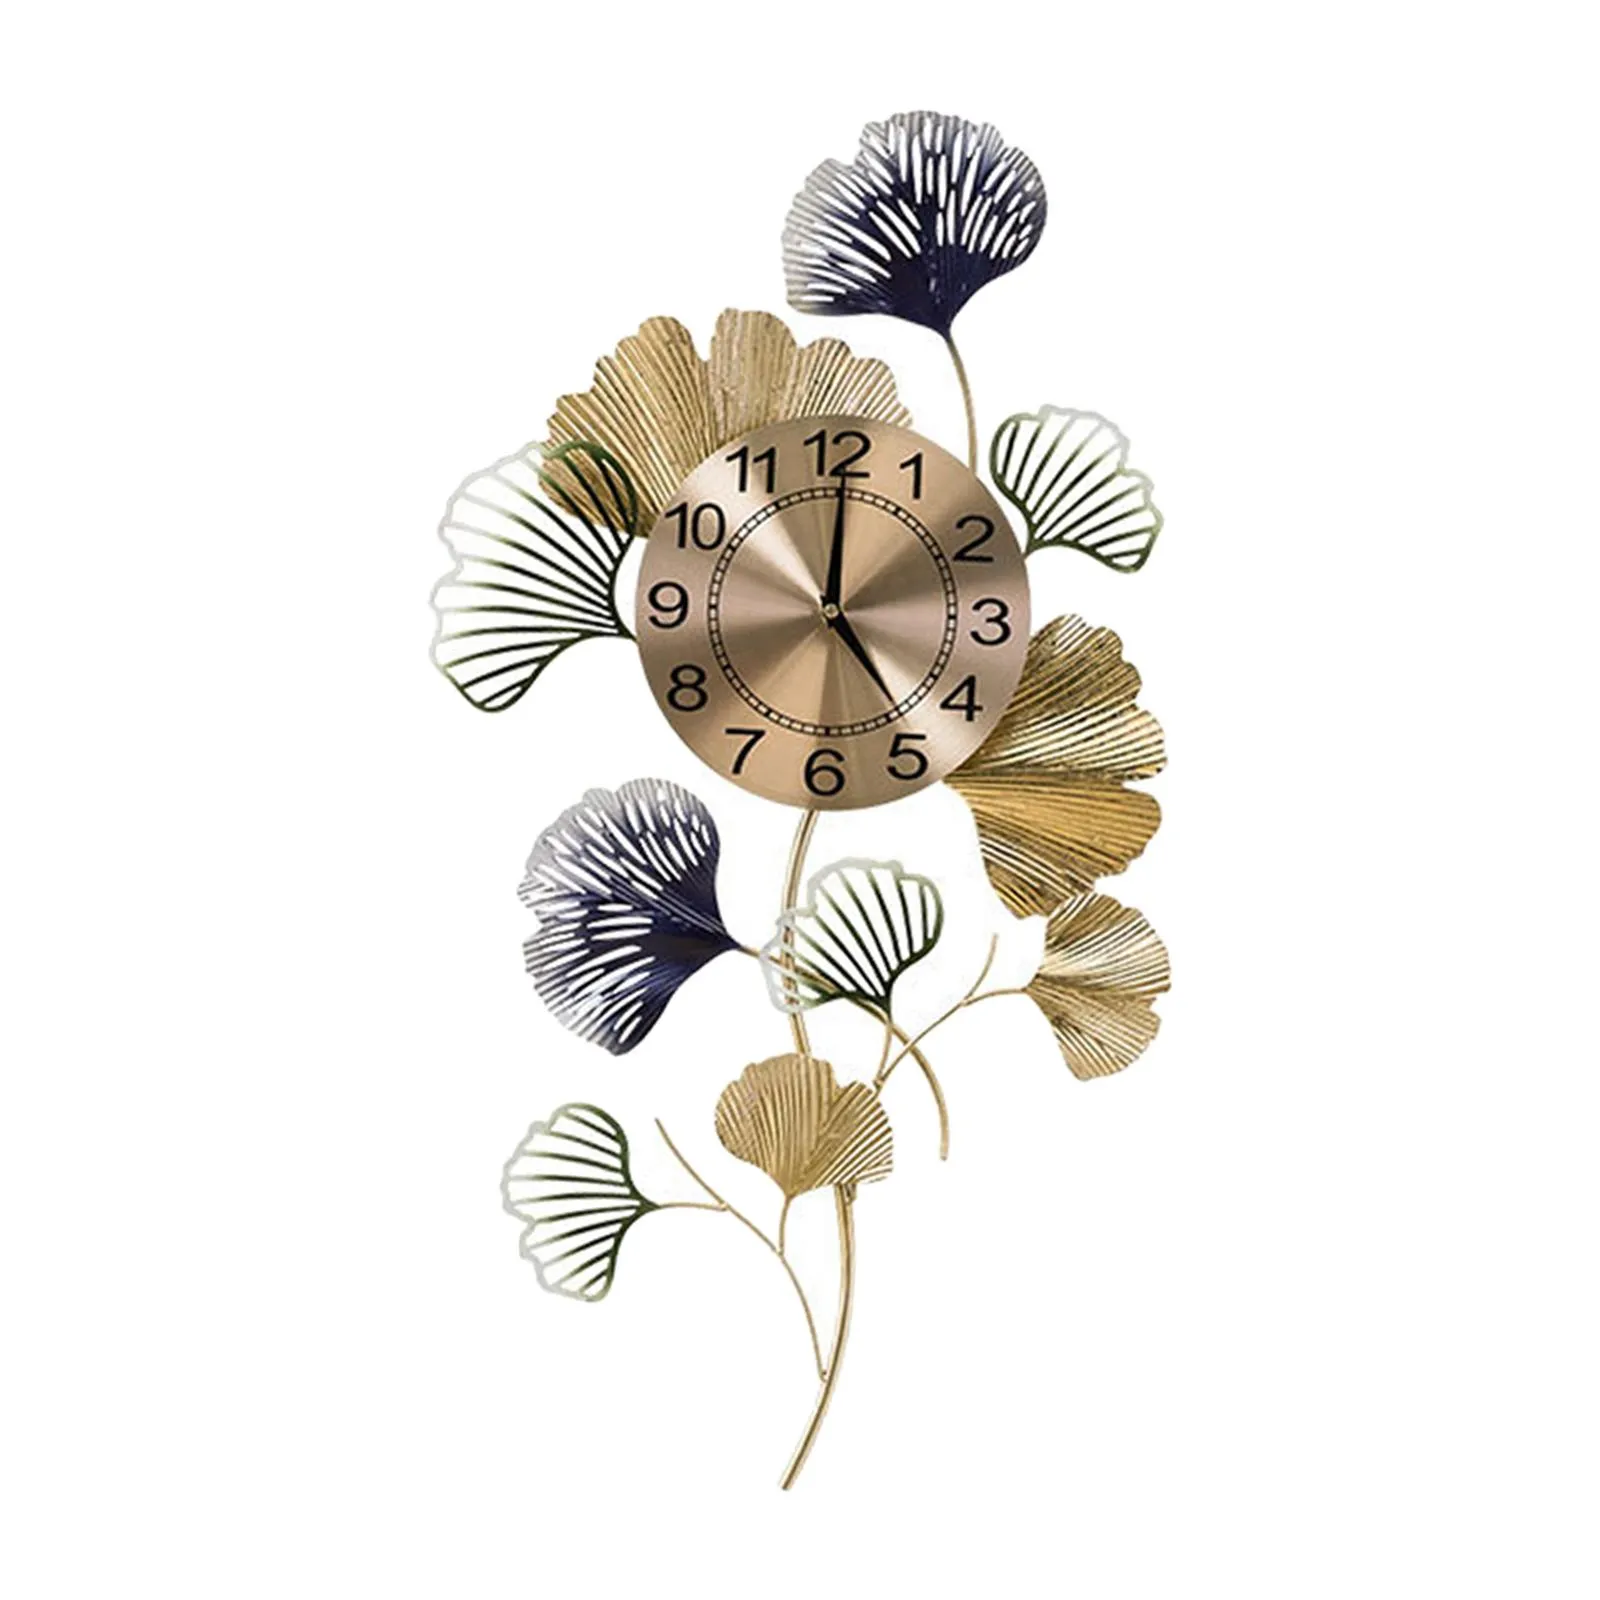 Iron Crafts Wall Watch Clock Non Ticking Ginkgo Leaf Decorative Decors Creative Home Hanging Wall Clocks for Farmhouse Hallway